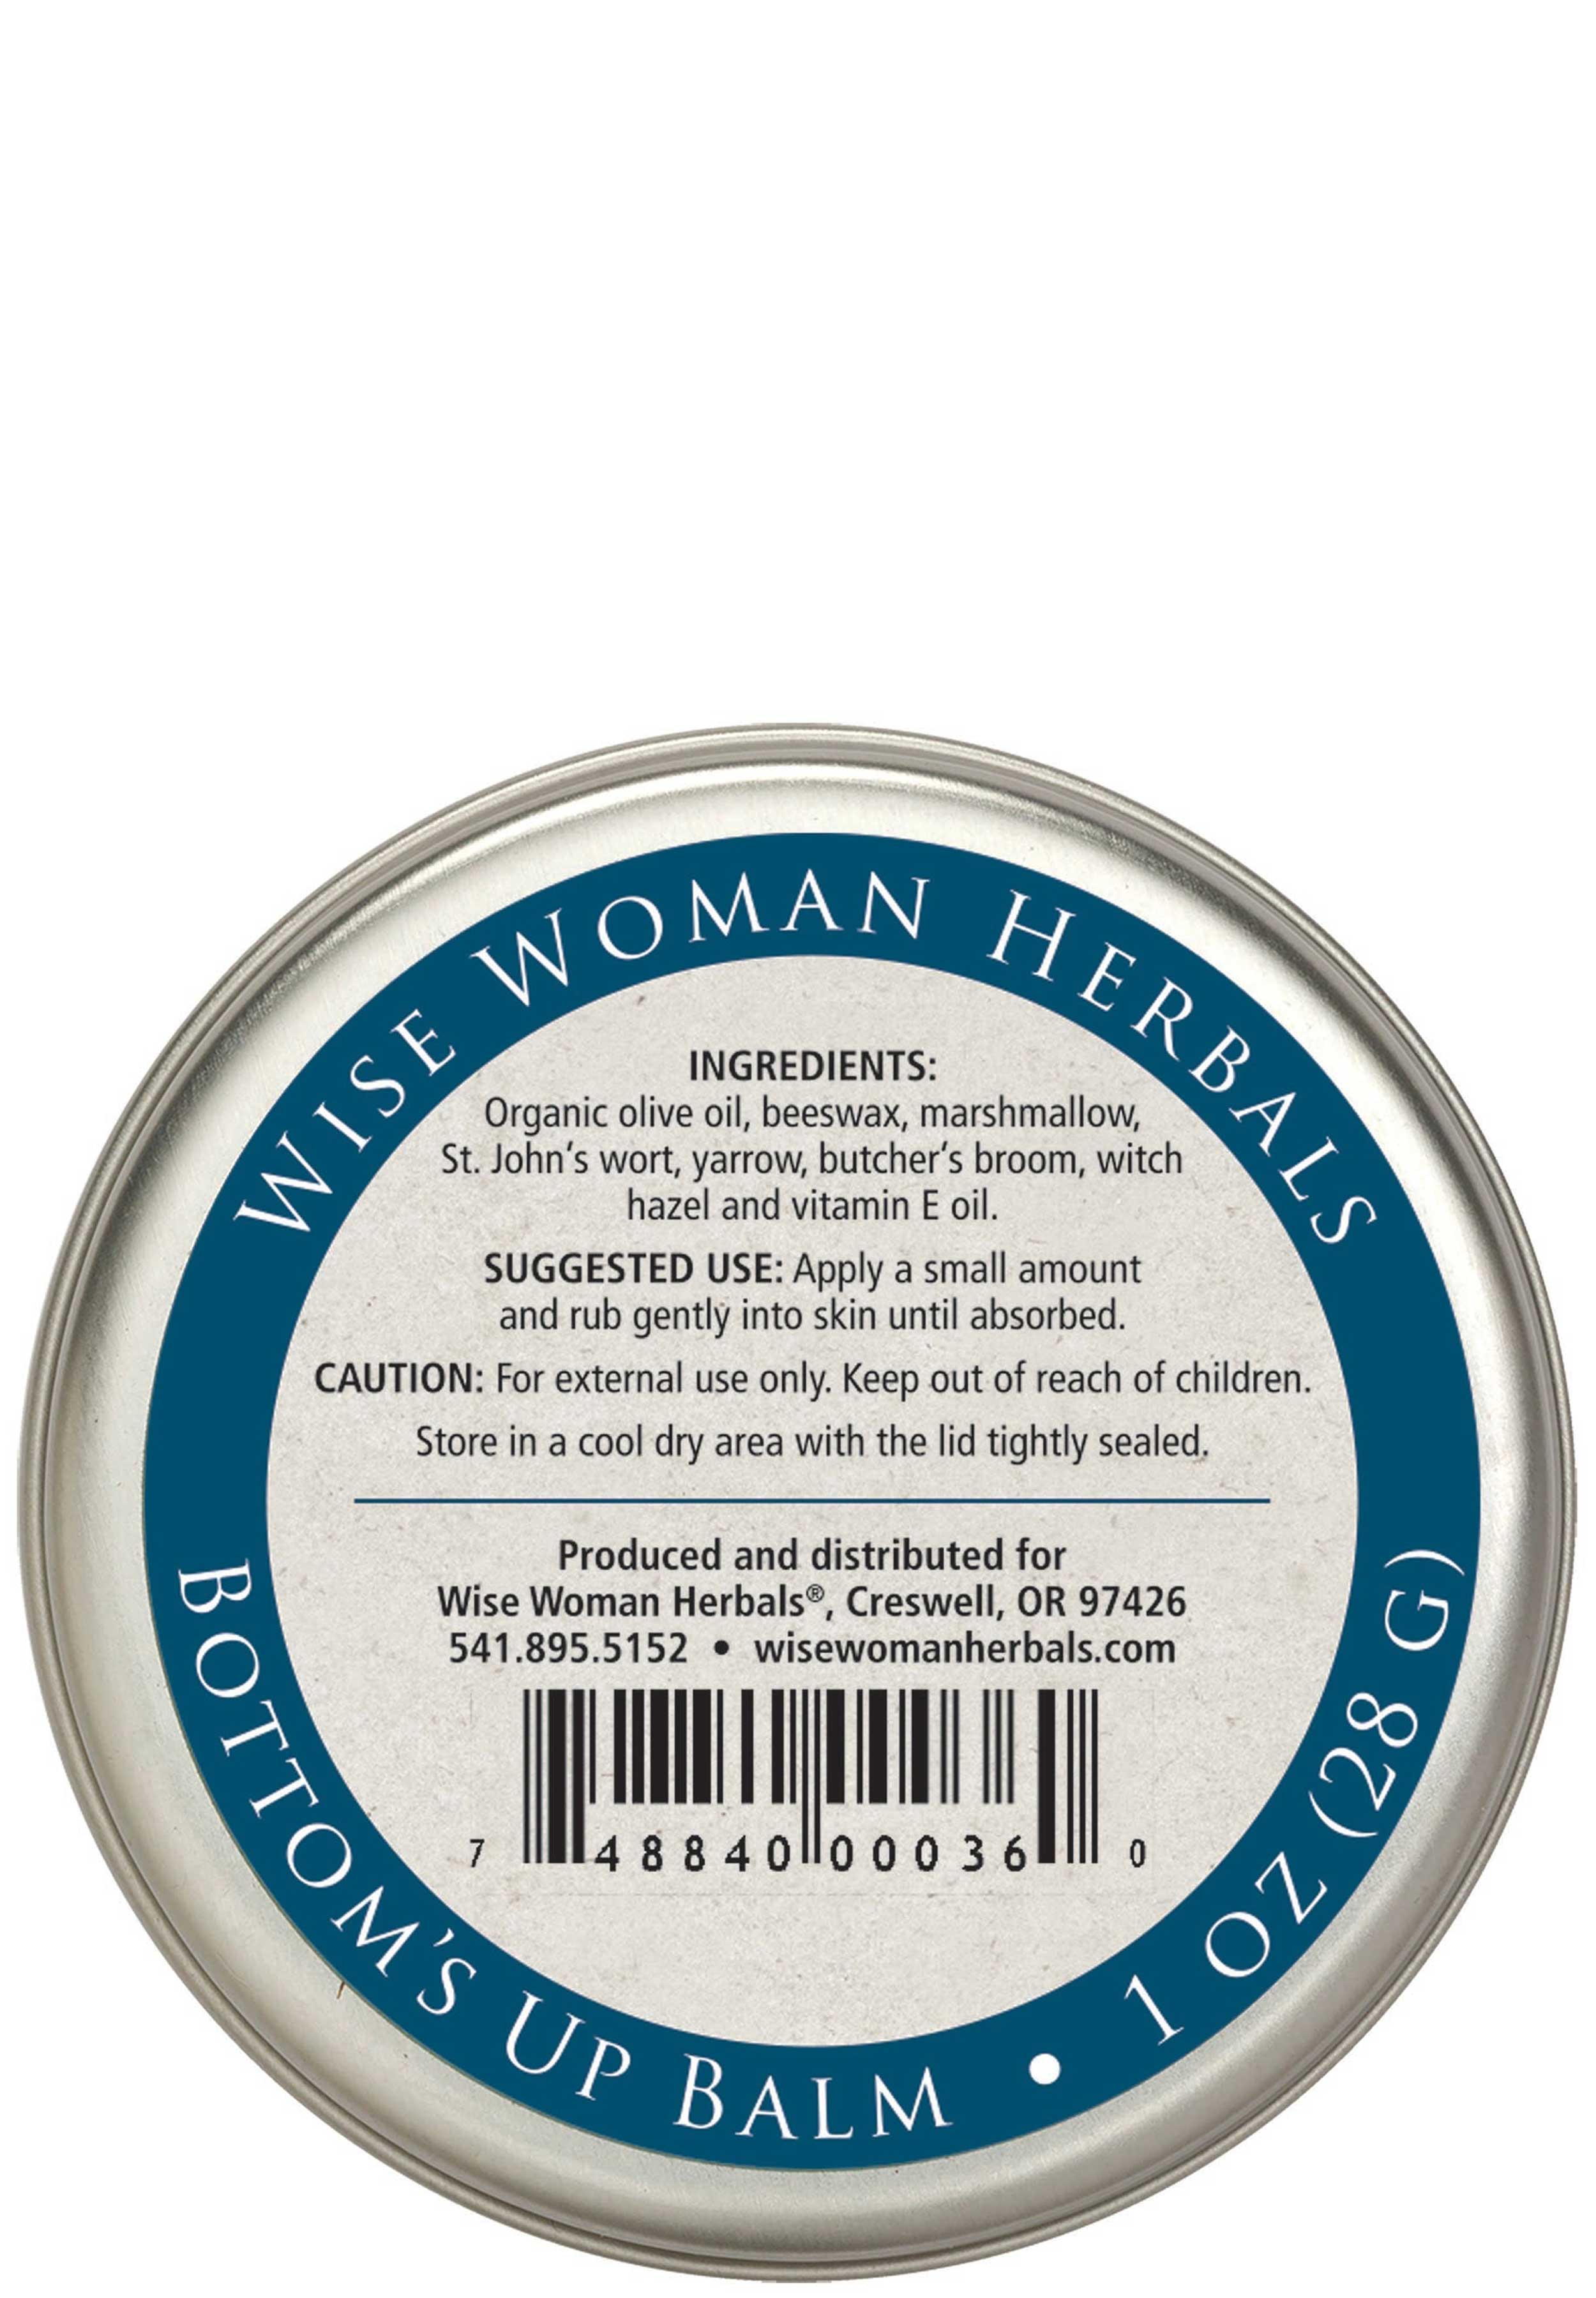 Wise Woman Herbals Bottoms Up Balm Ingredients